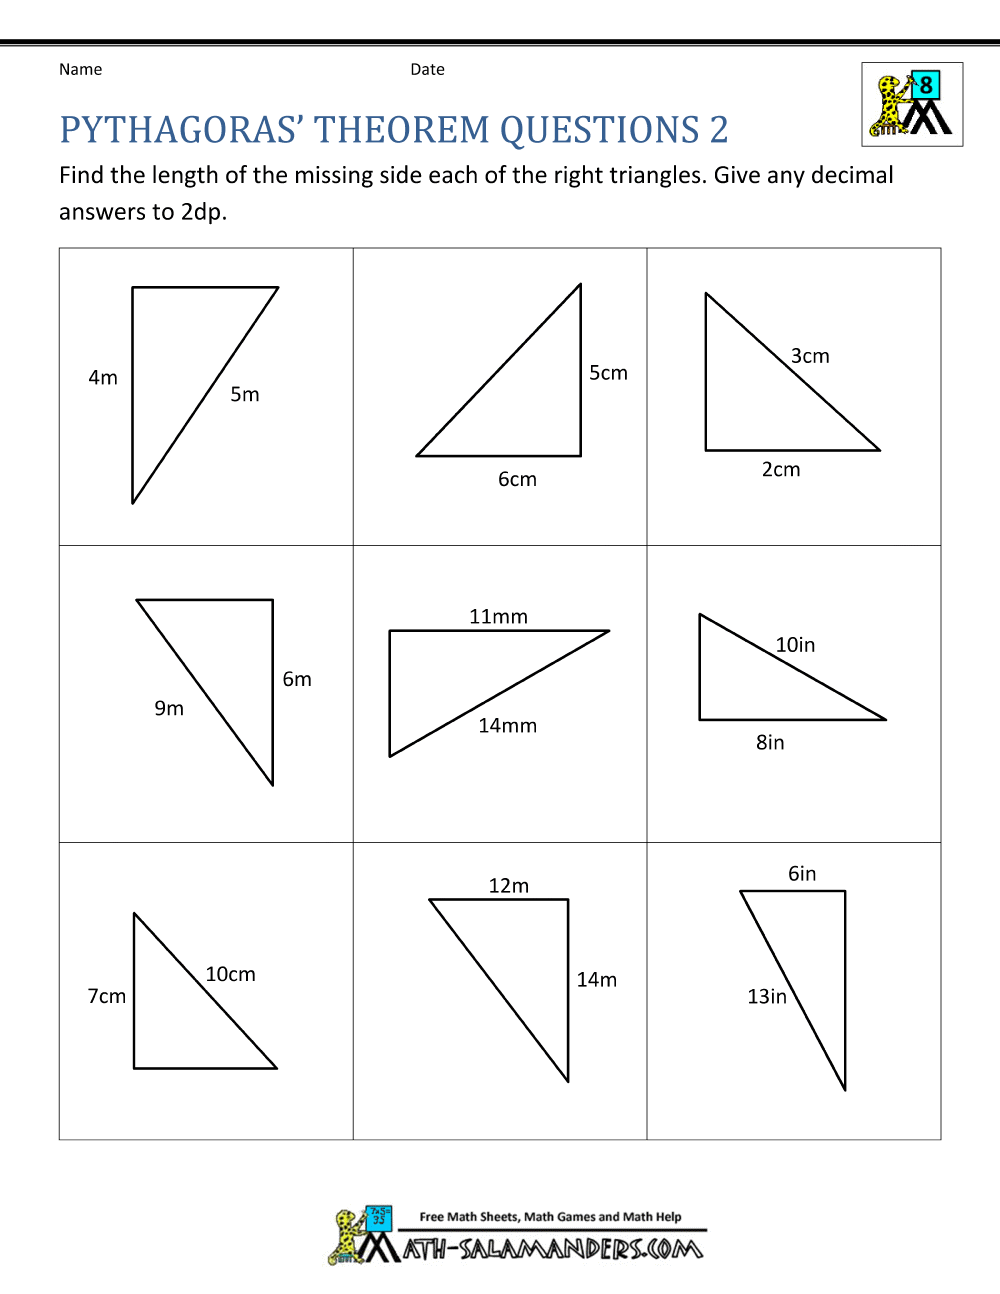 Pythagoras Theorem Questions With Pythagorean Theorem Practice Worksheet